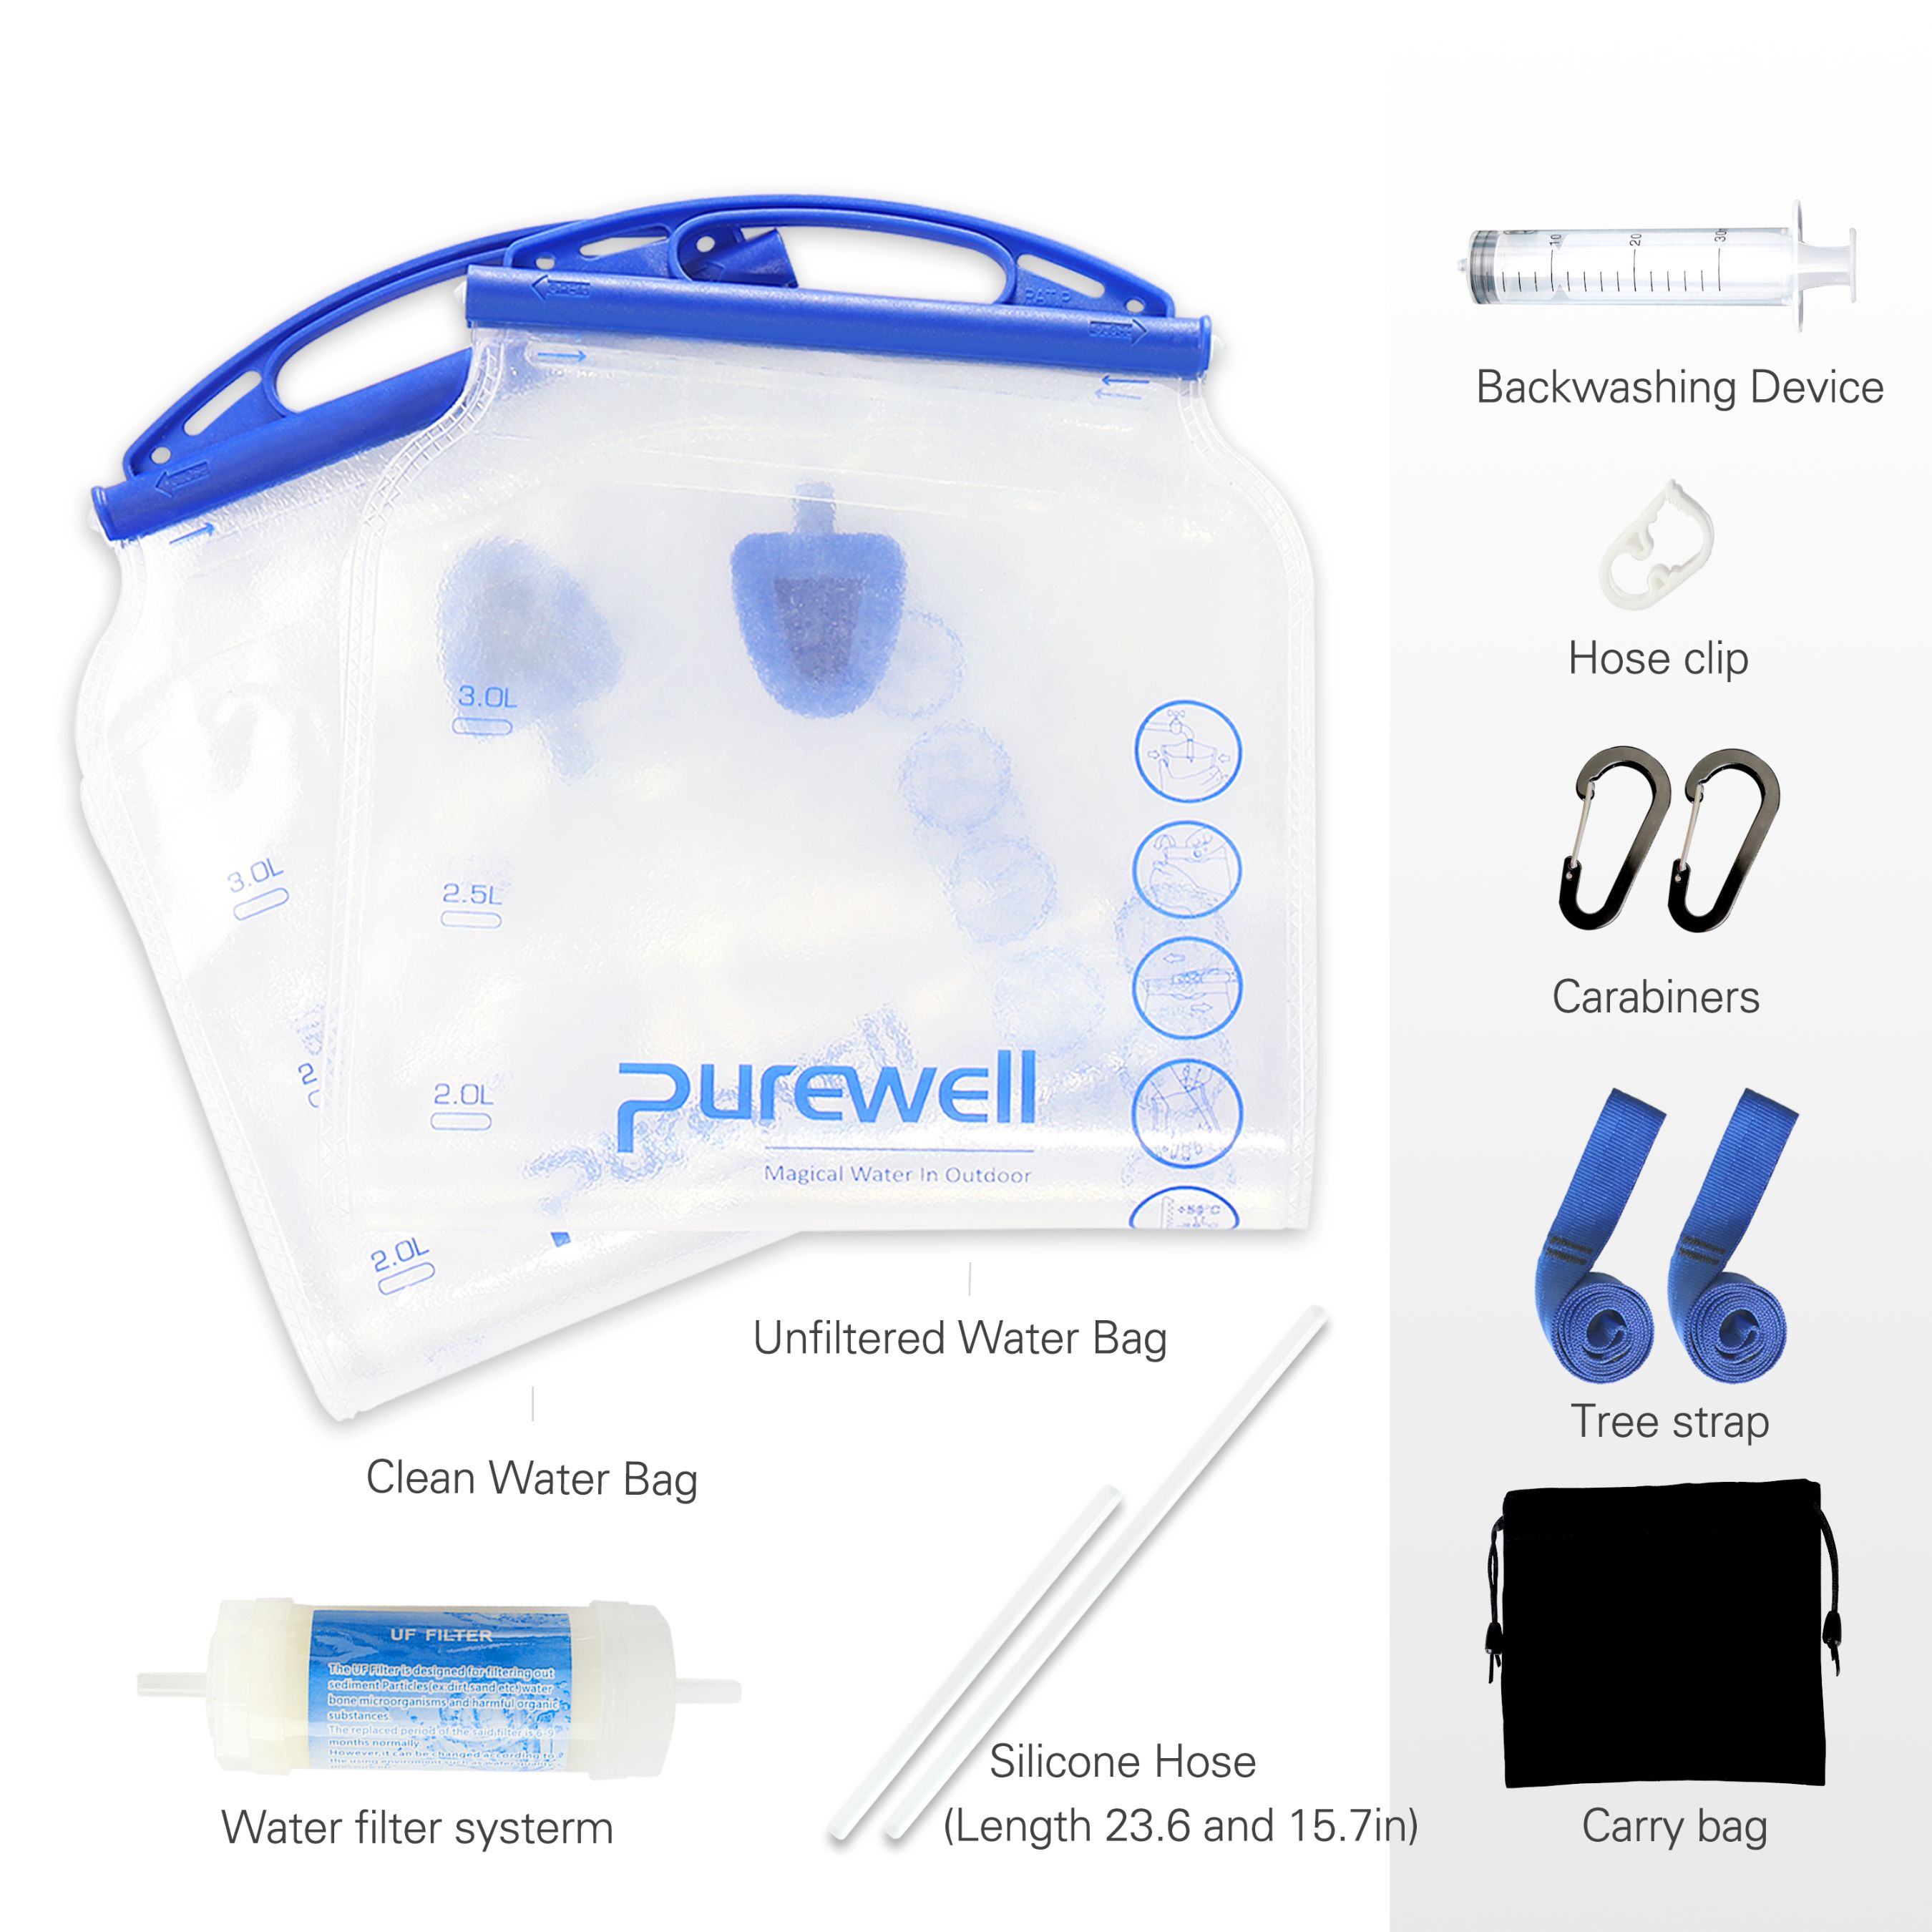 Purewell Array image426